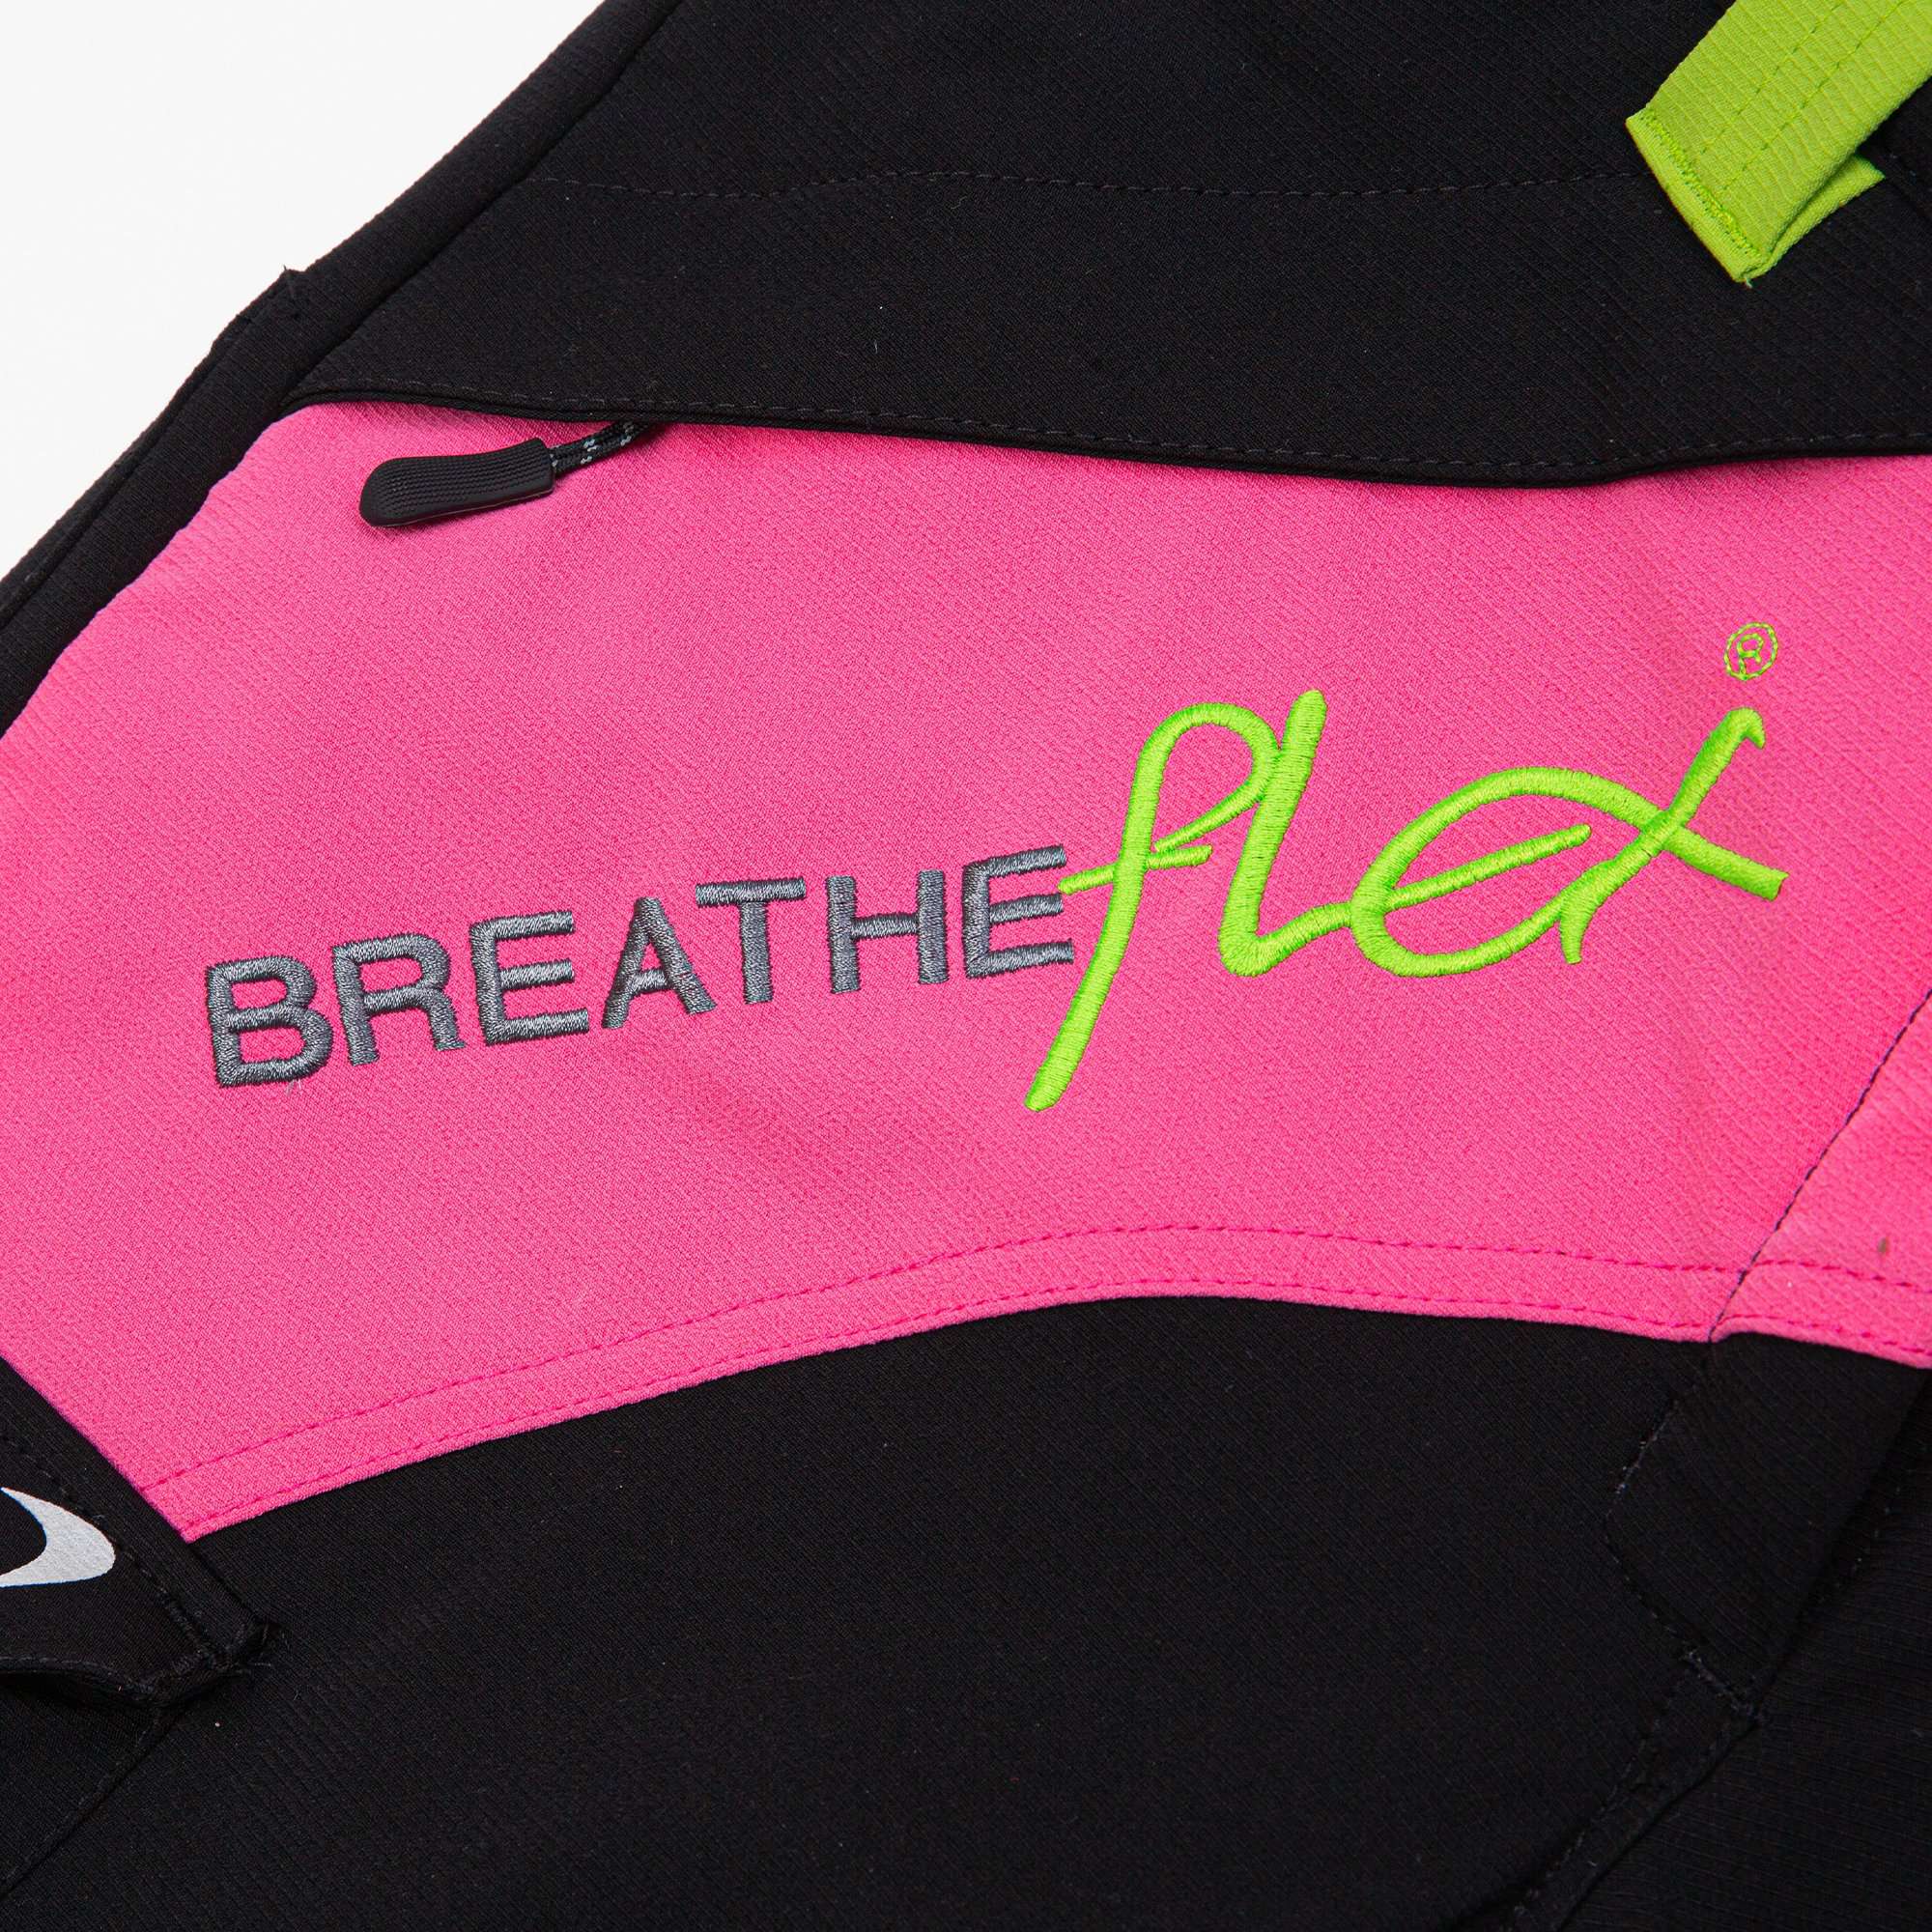 AT4010 Breatheflex Type A Class 1 Chainsaw Trousers - Pink - Arbortec Forestwear